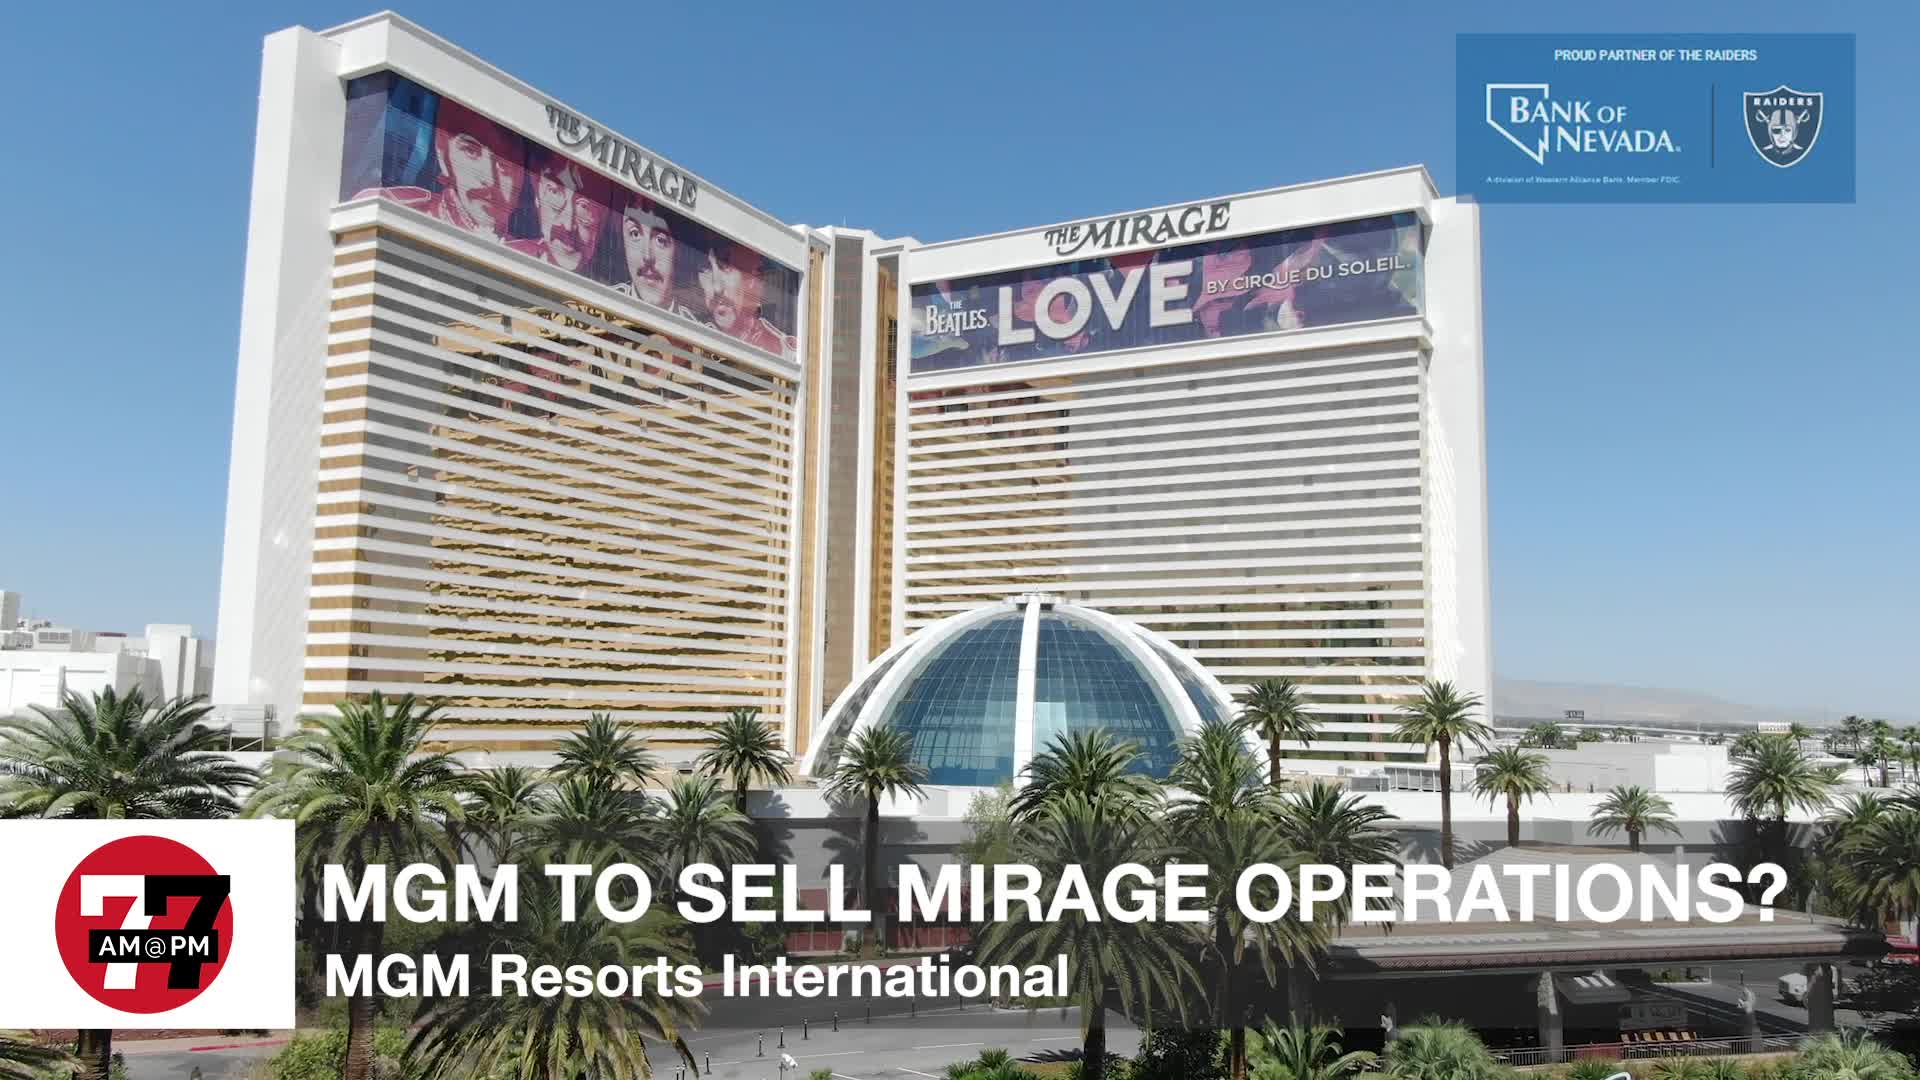 7@7PM MGM to Sell Mirage Operations?